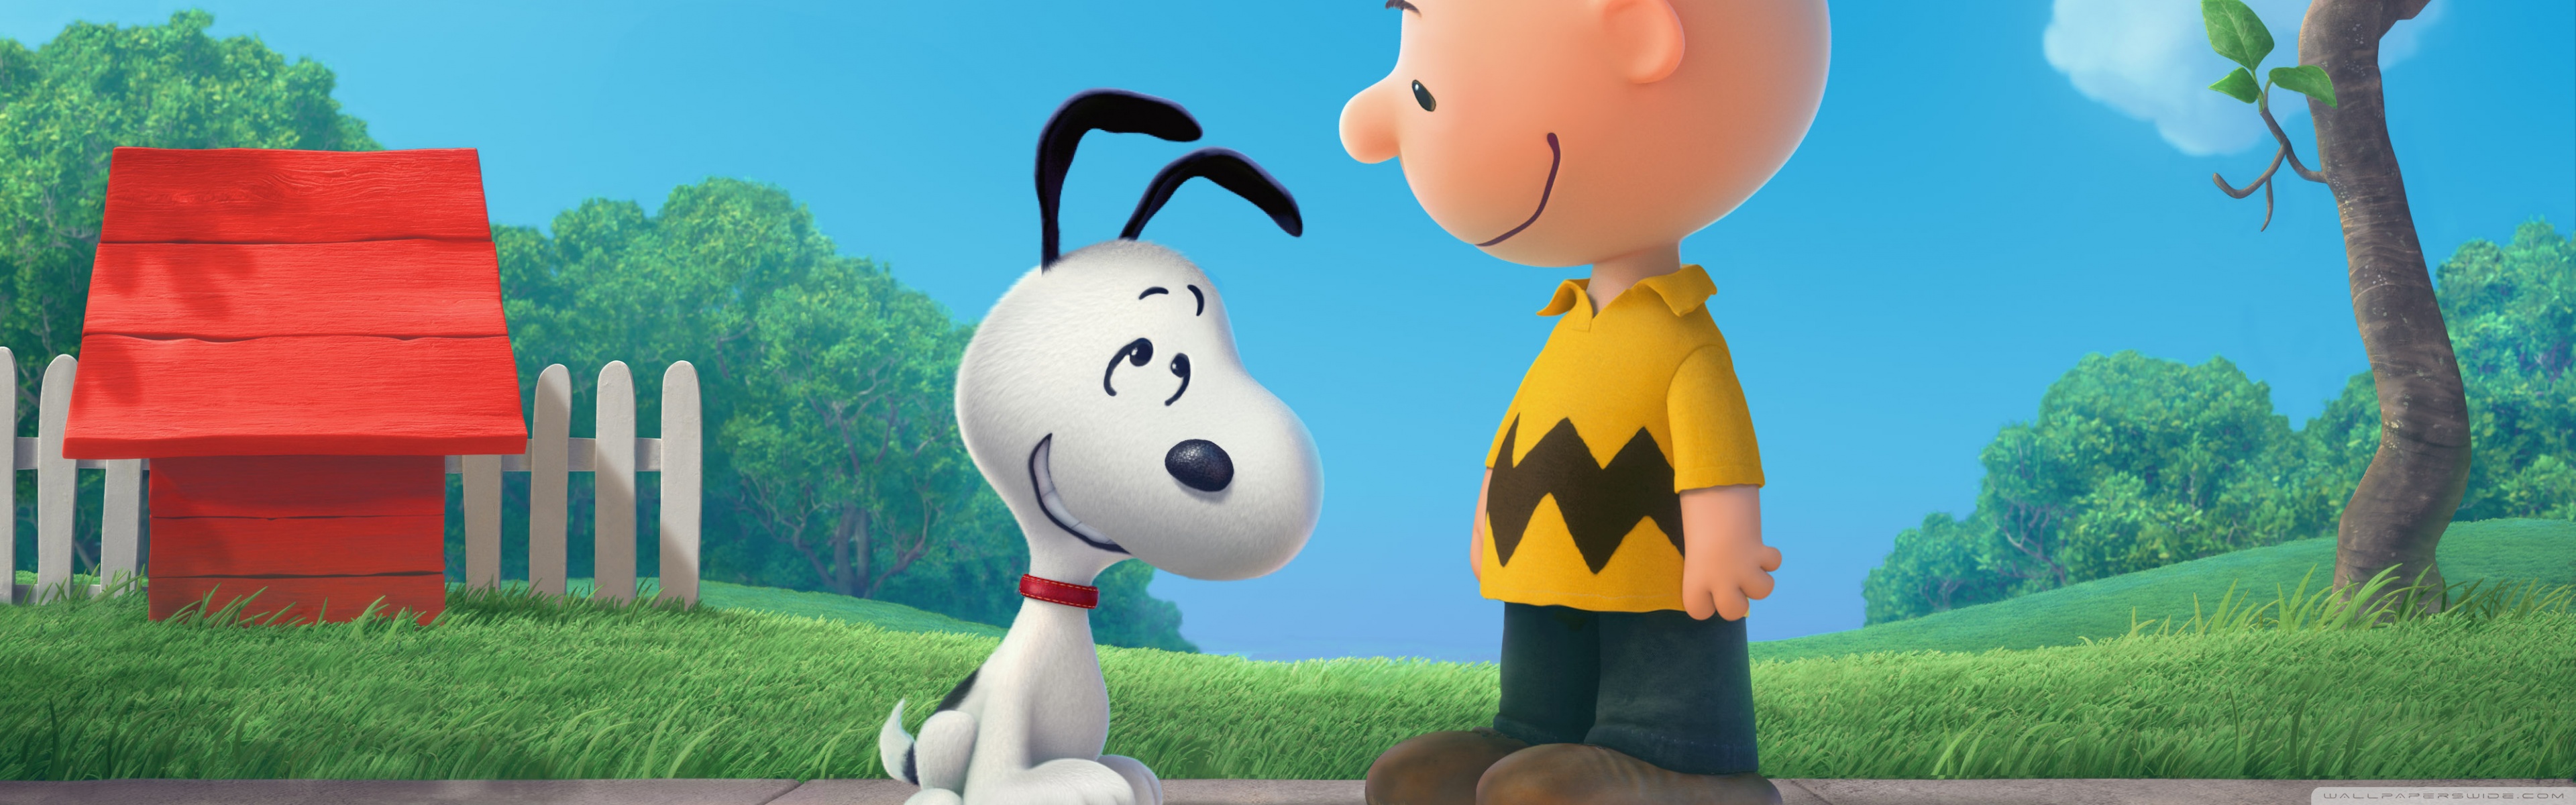 Charlie Brown And Snoopy God - HD Wallpaper 